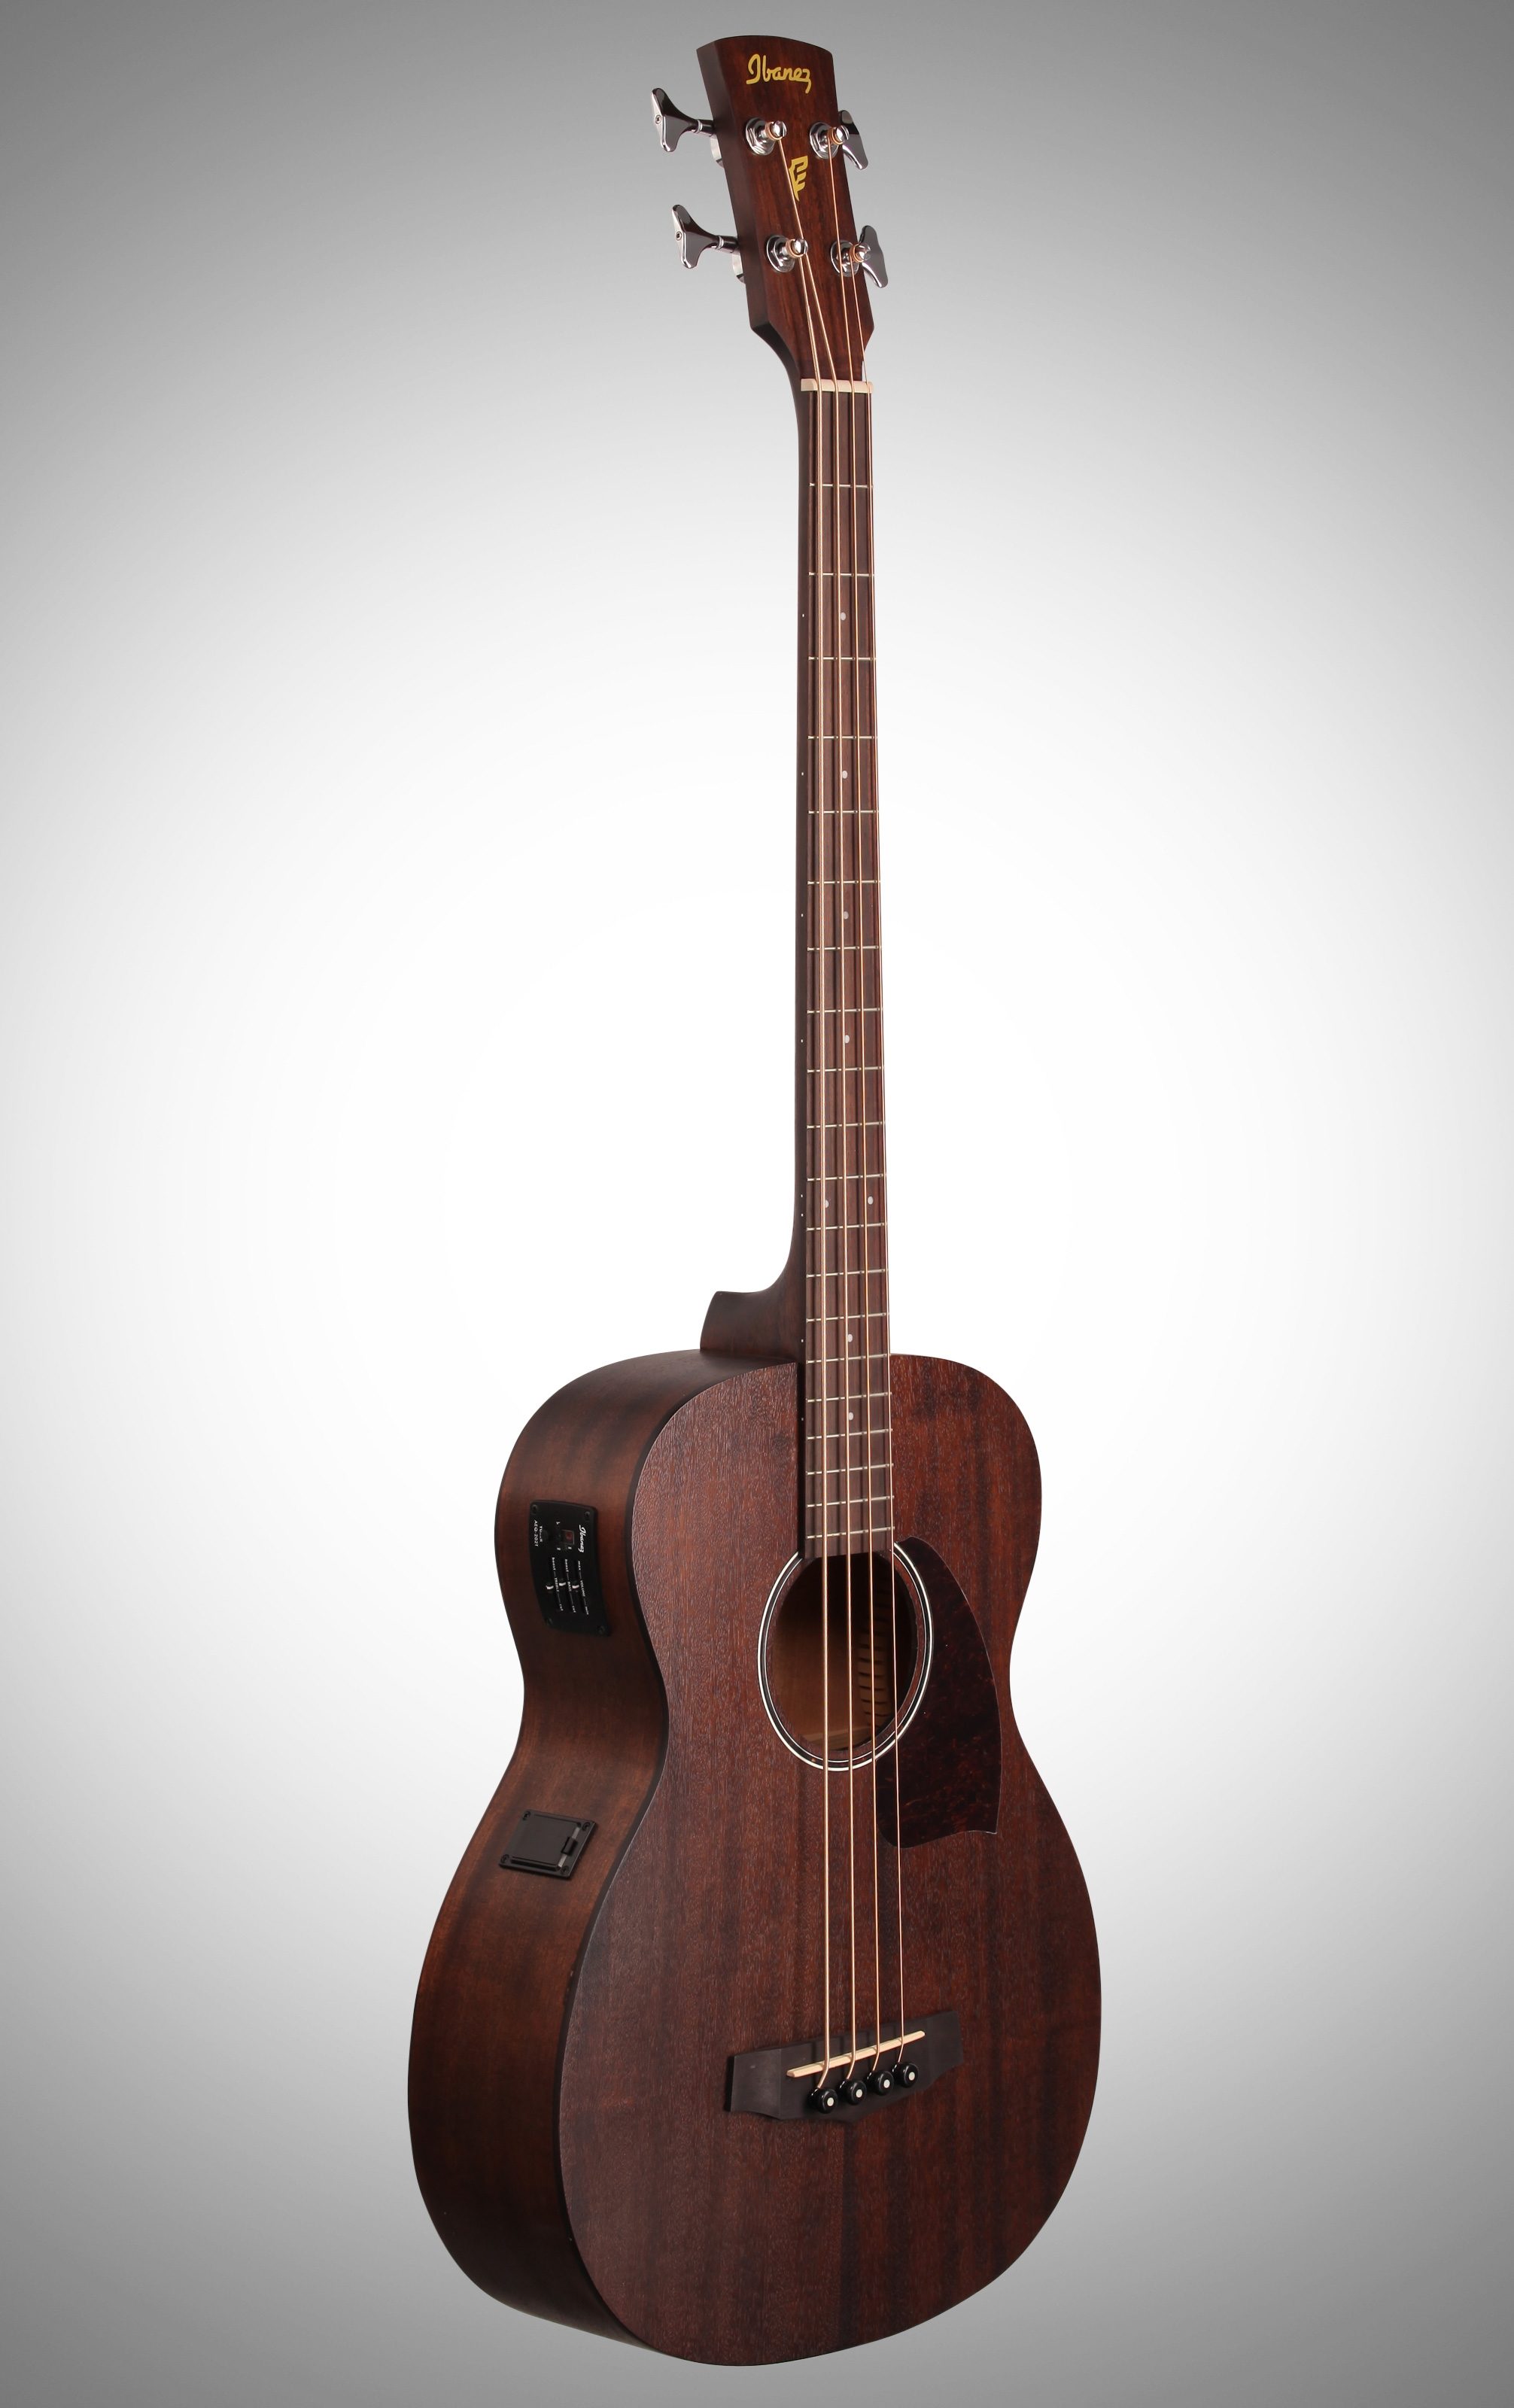 ibanez pcbe12mh opn acoustic bass review